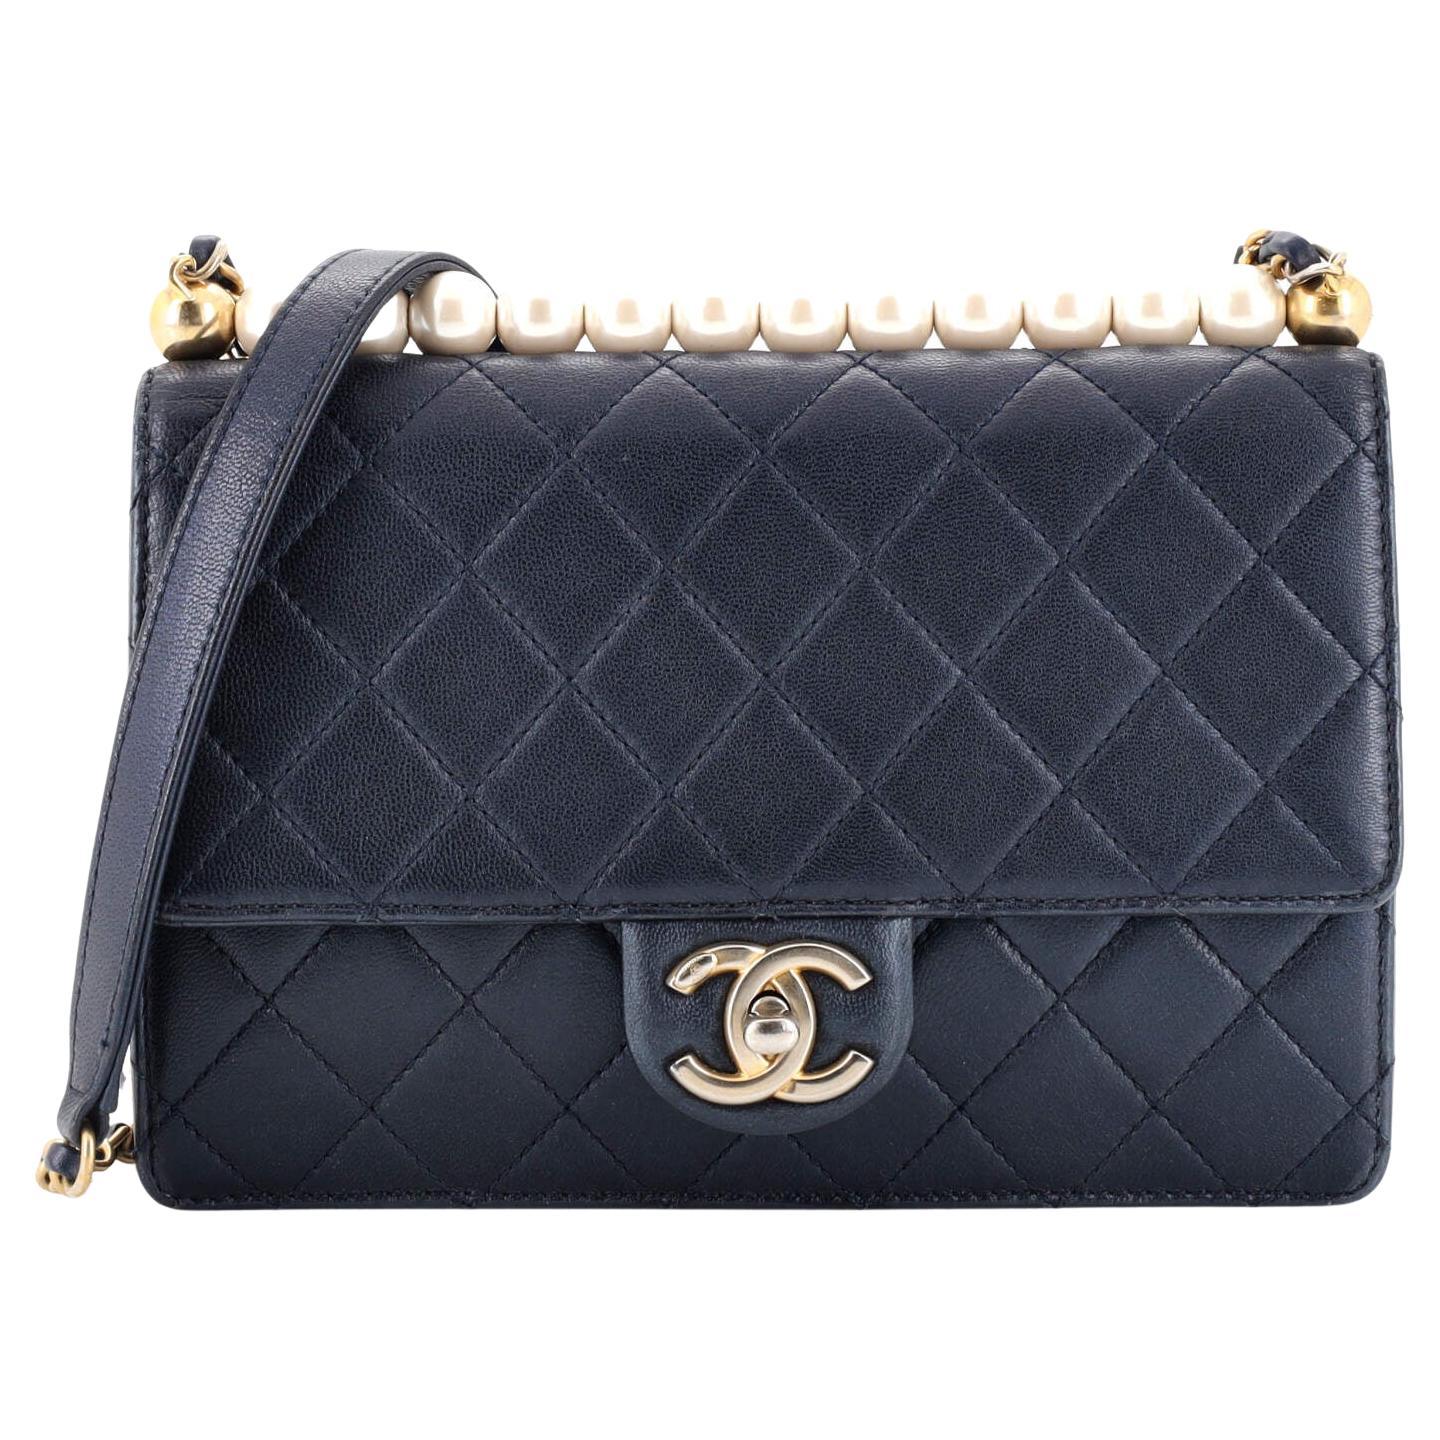 Chanel Model: Condition: Very good. CChic Pearls Flap Bag Quilted Lambskin Small For Sale